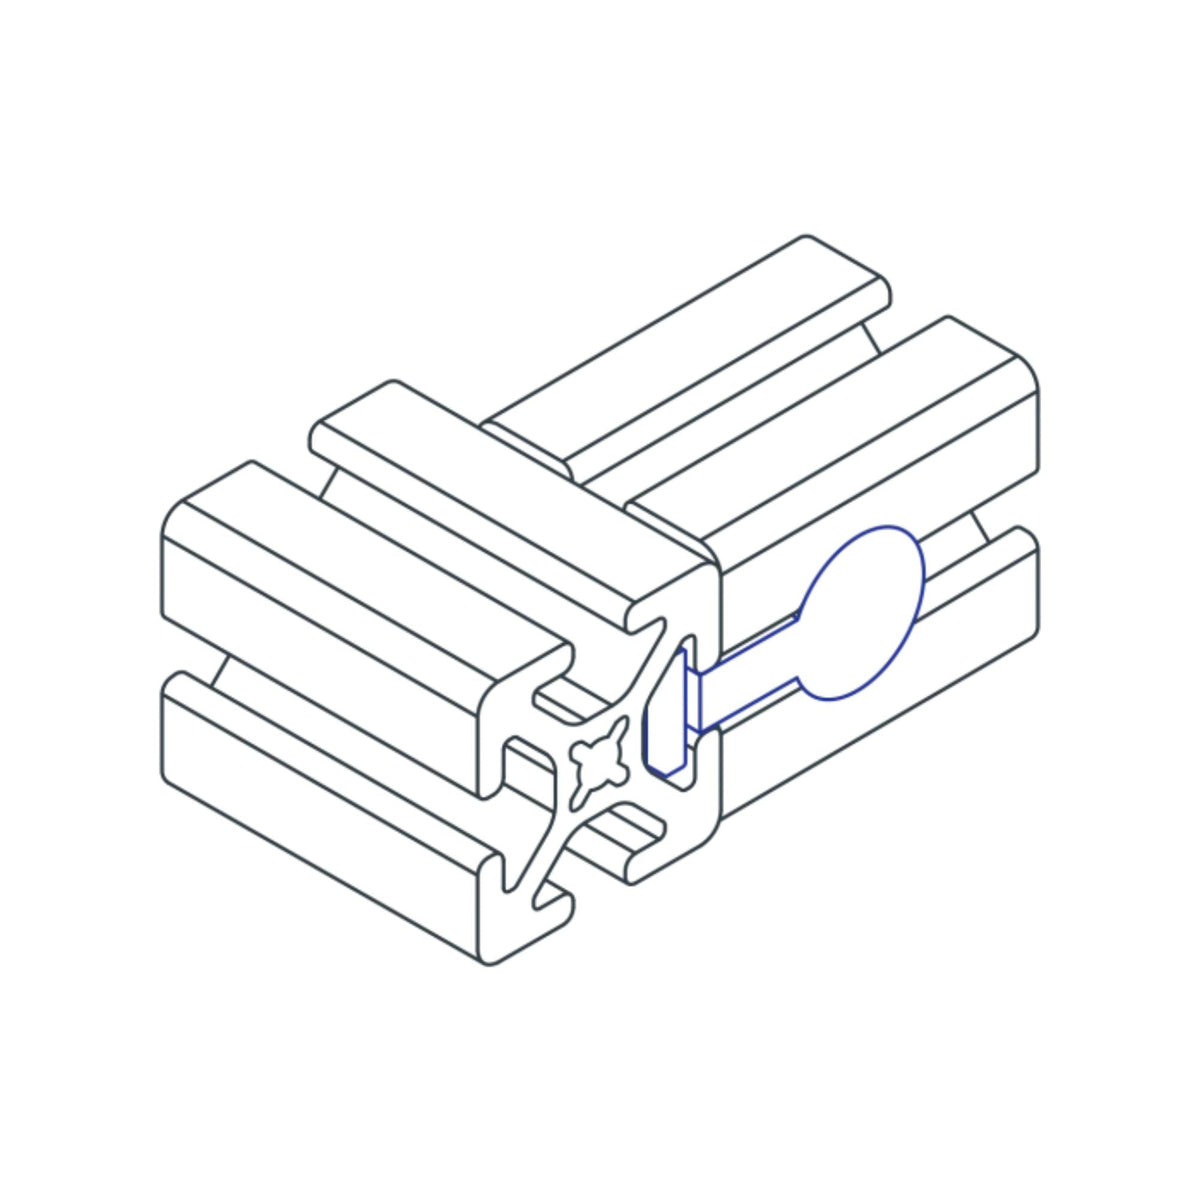 diagram of a fastener assembly and a t-slotted bar